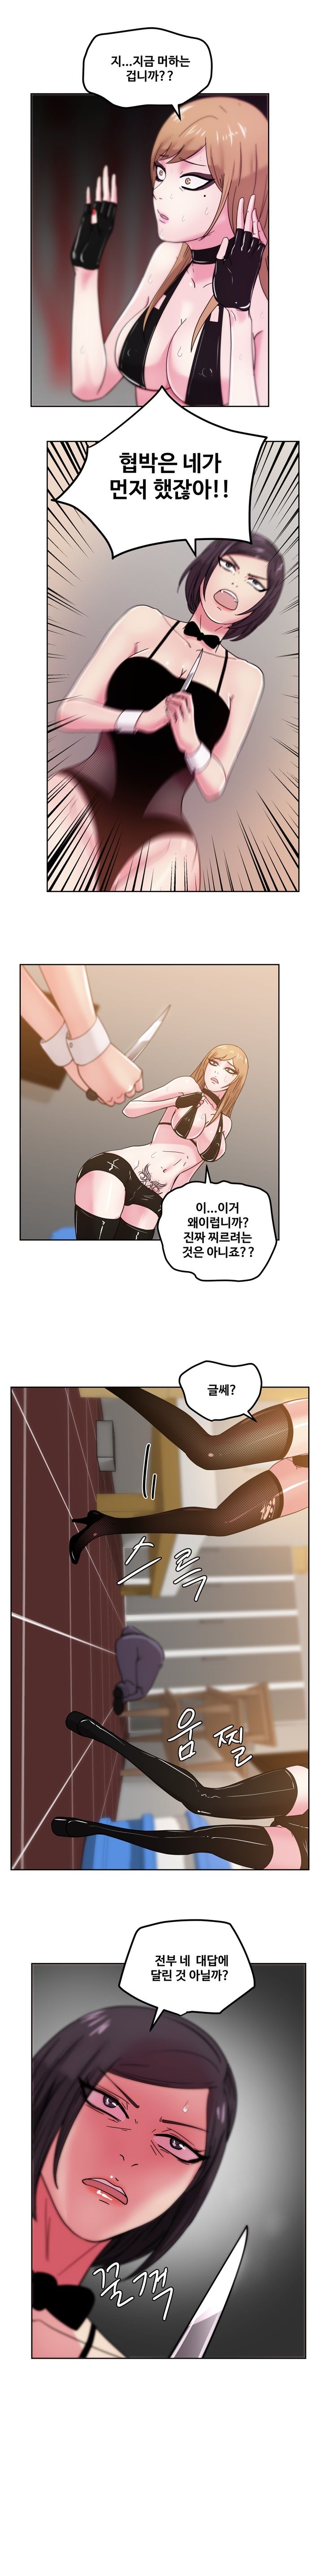 Sooyung Comic Shop Raw - Chapter 44 Page 1